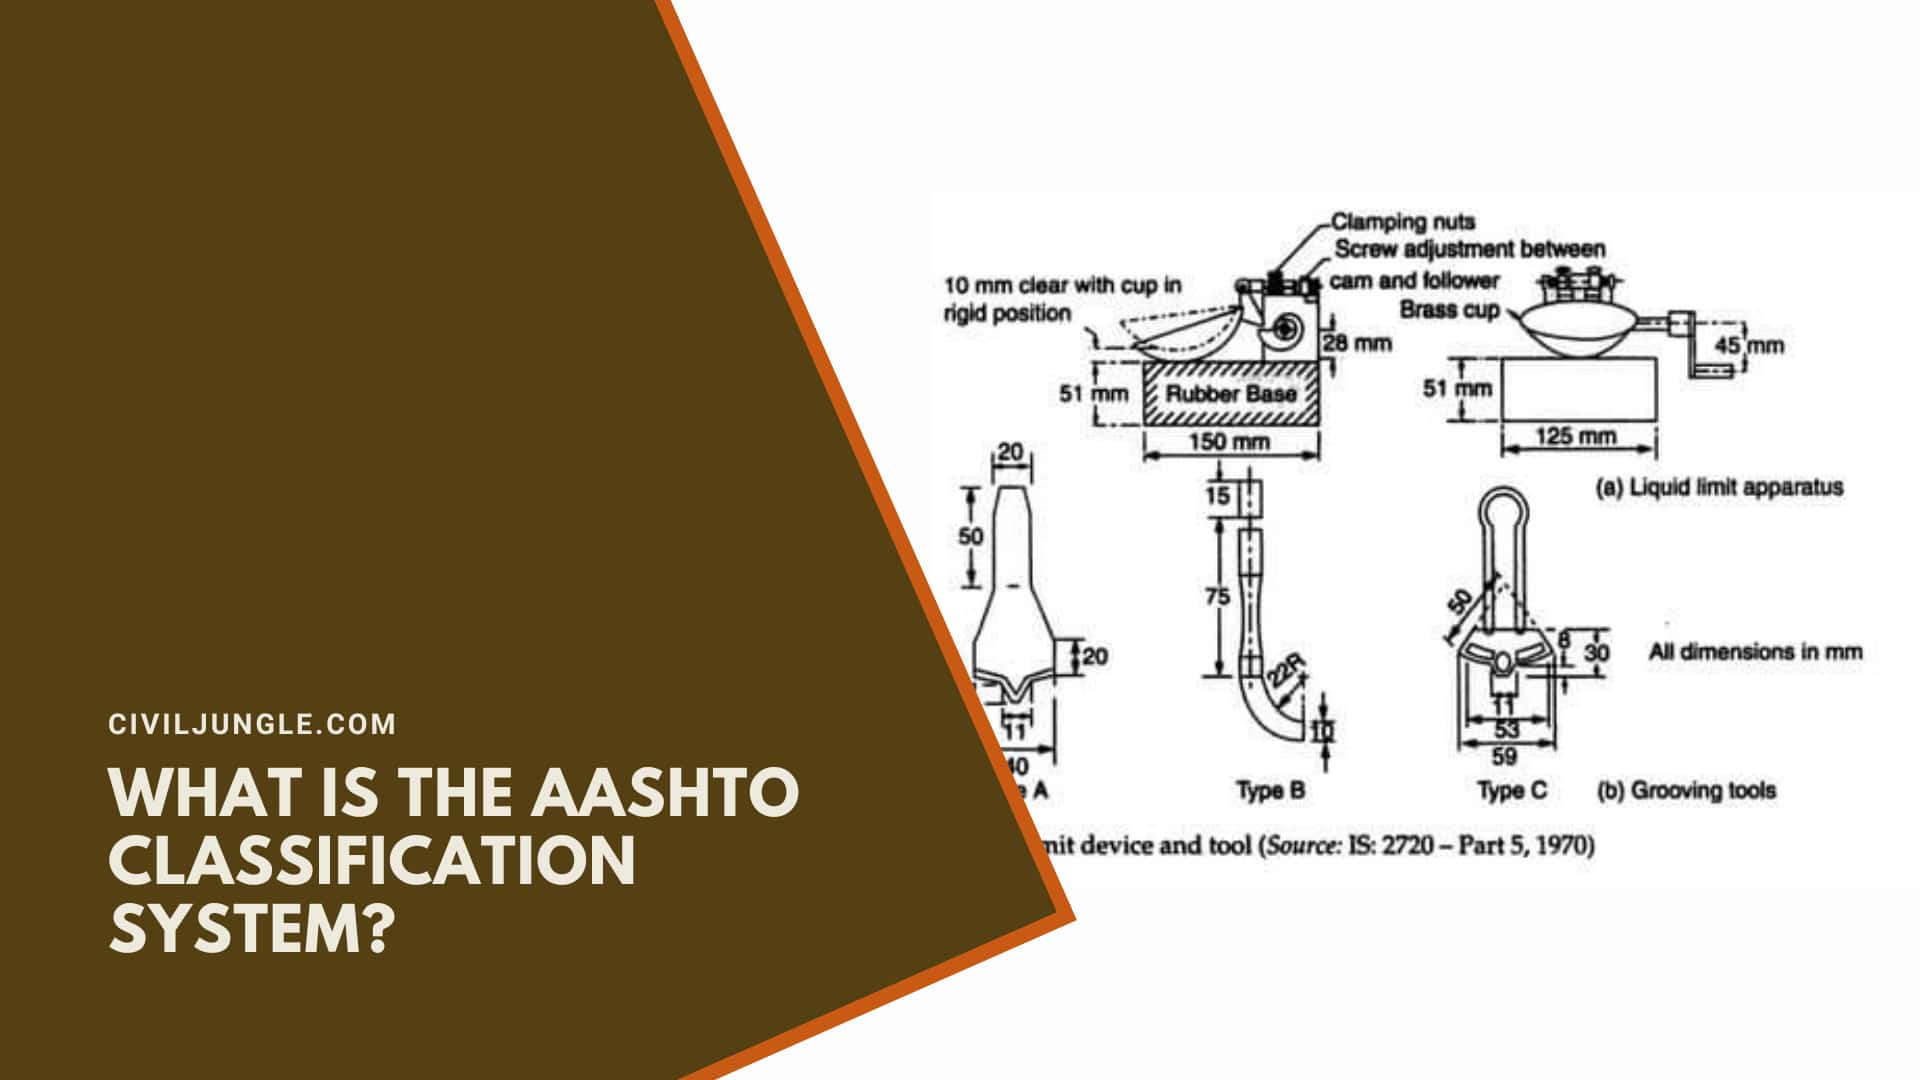 What Is the AASHTO Classification System